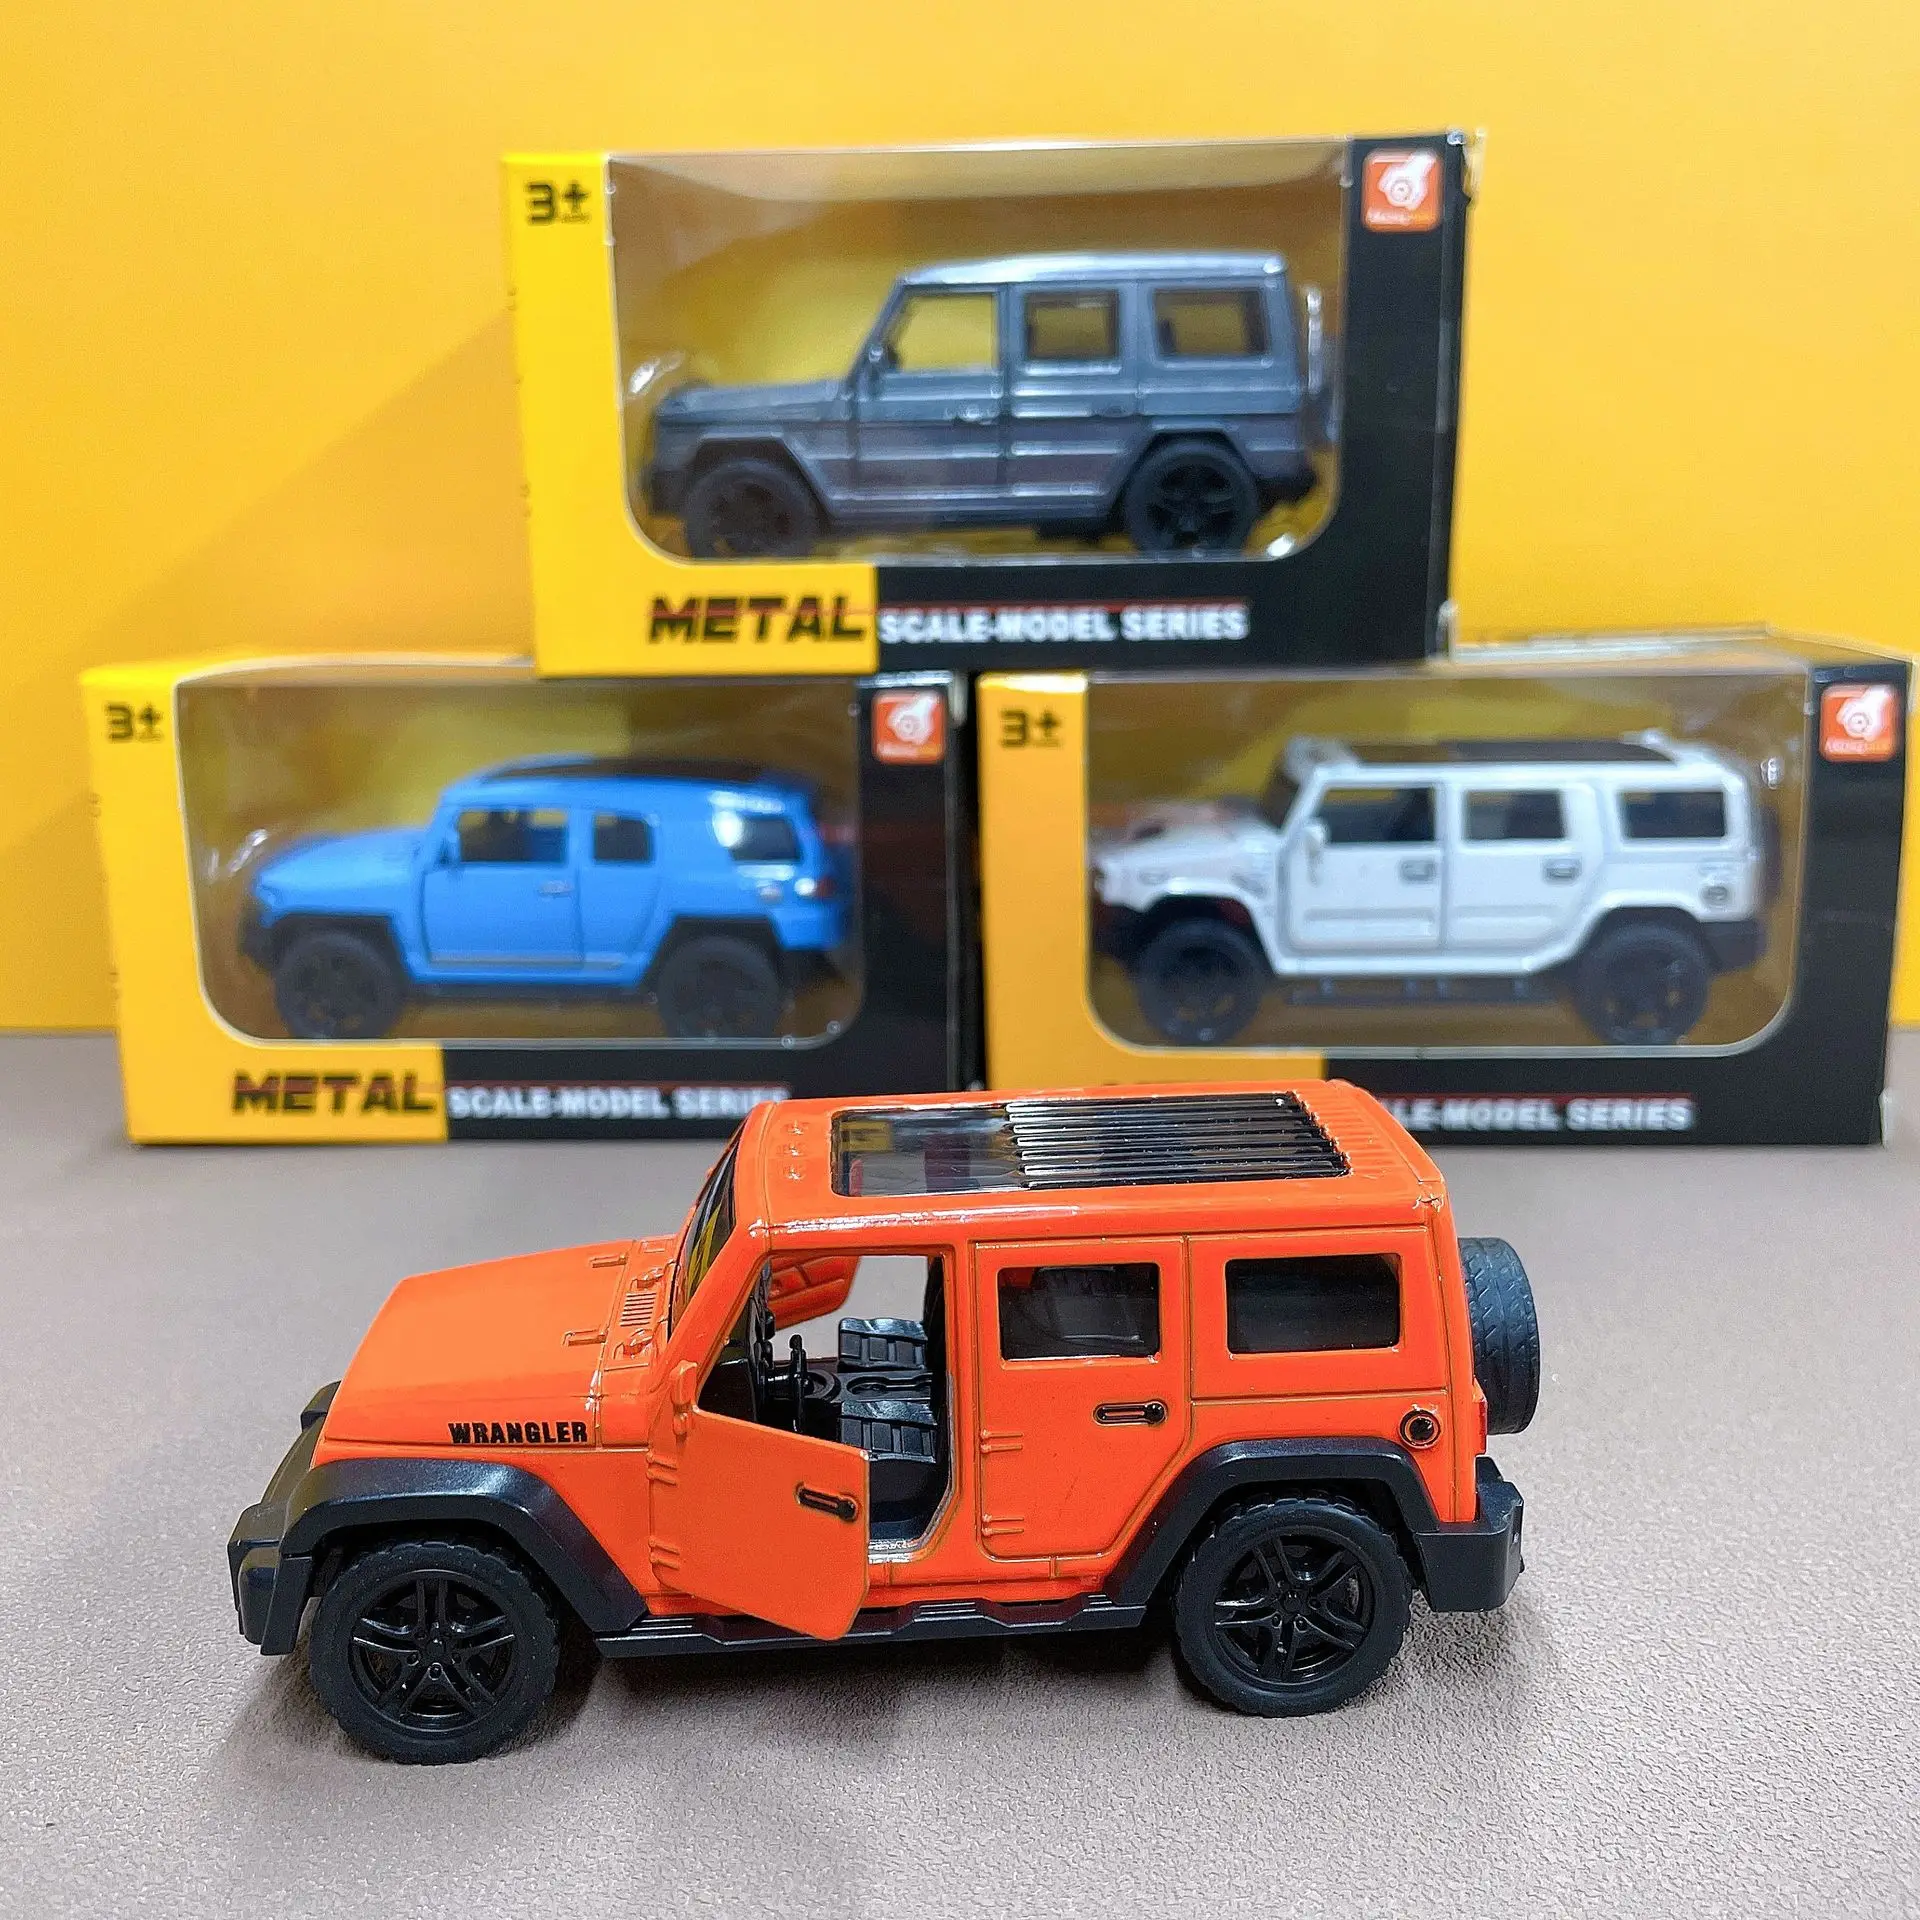 

1/39 Scale Can Open the Door Metal Custom Four Colors Model Car Toy Vehicles for Kids Pull Back Alloy Diecast Toys